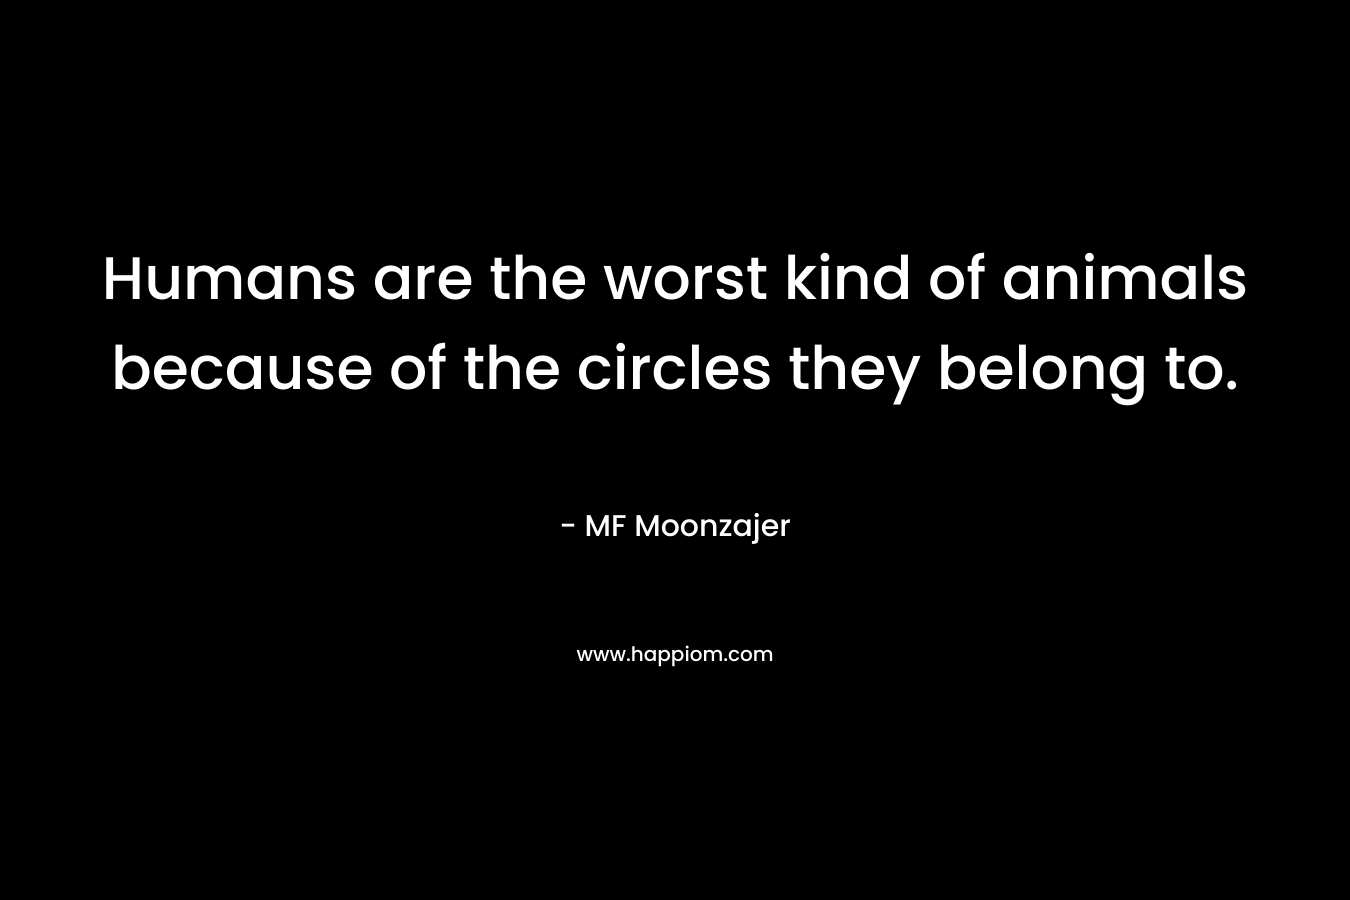 Humans are the worst kind of animals because of the circles they belong to. – MF Moonzajer